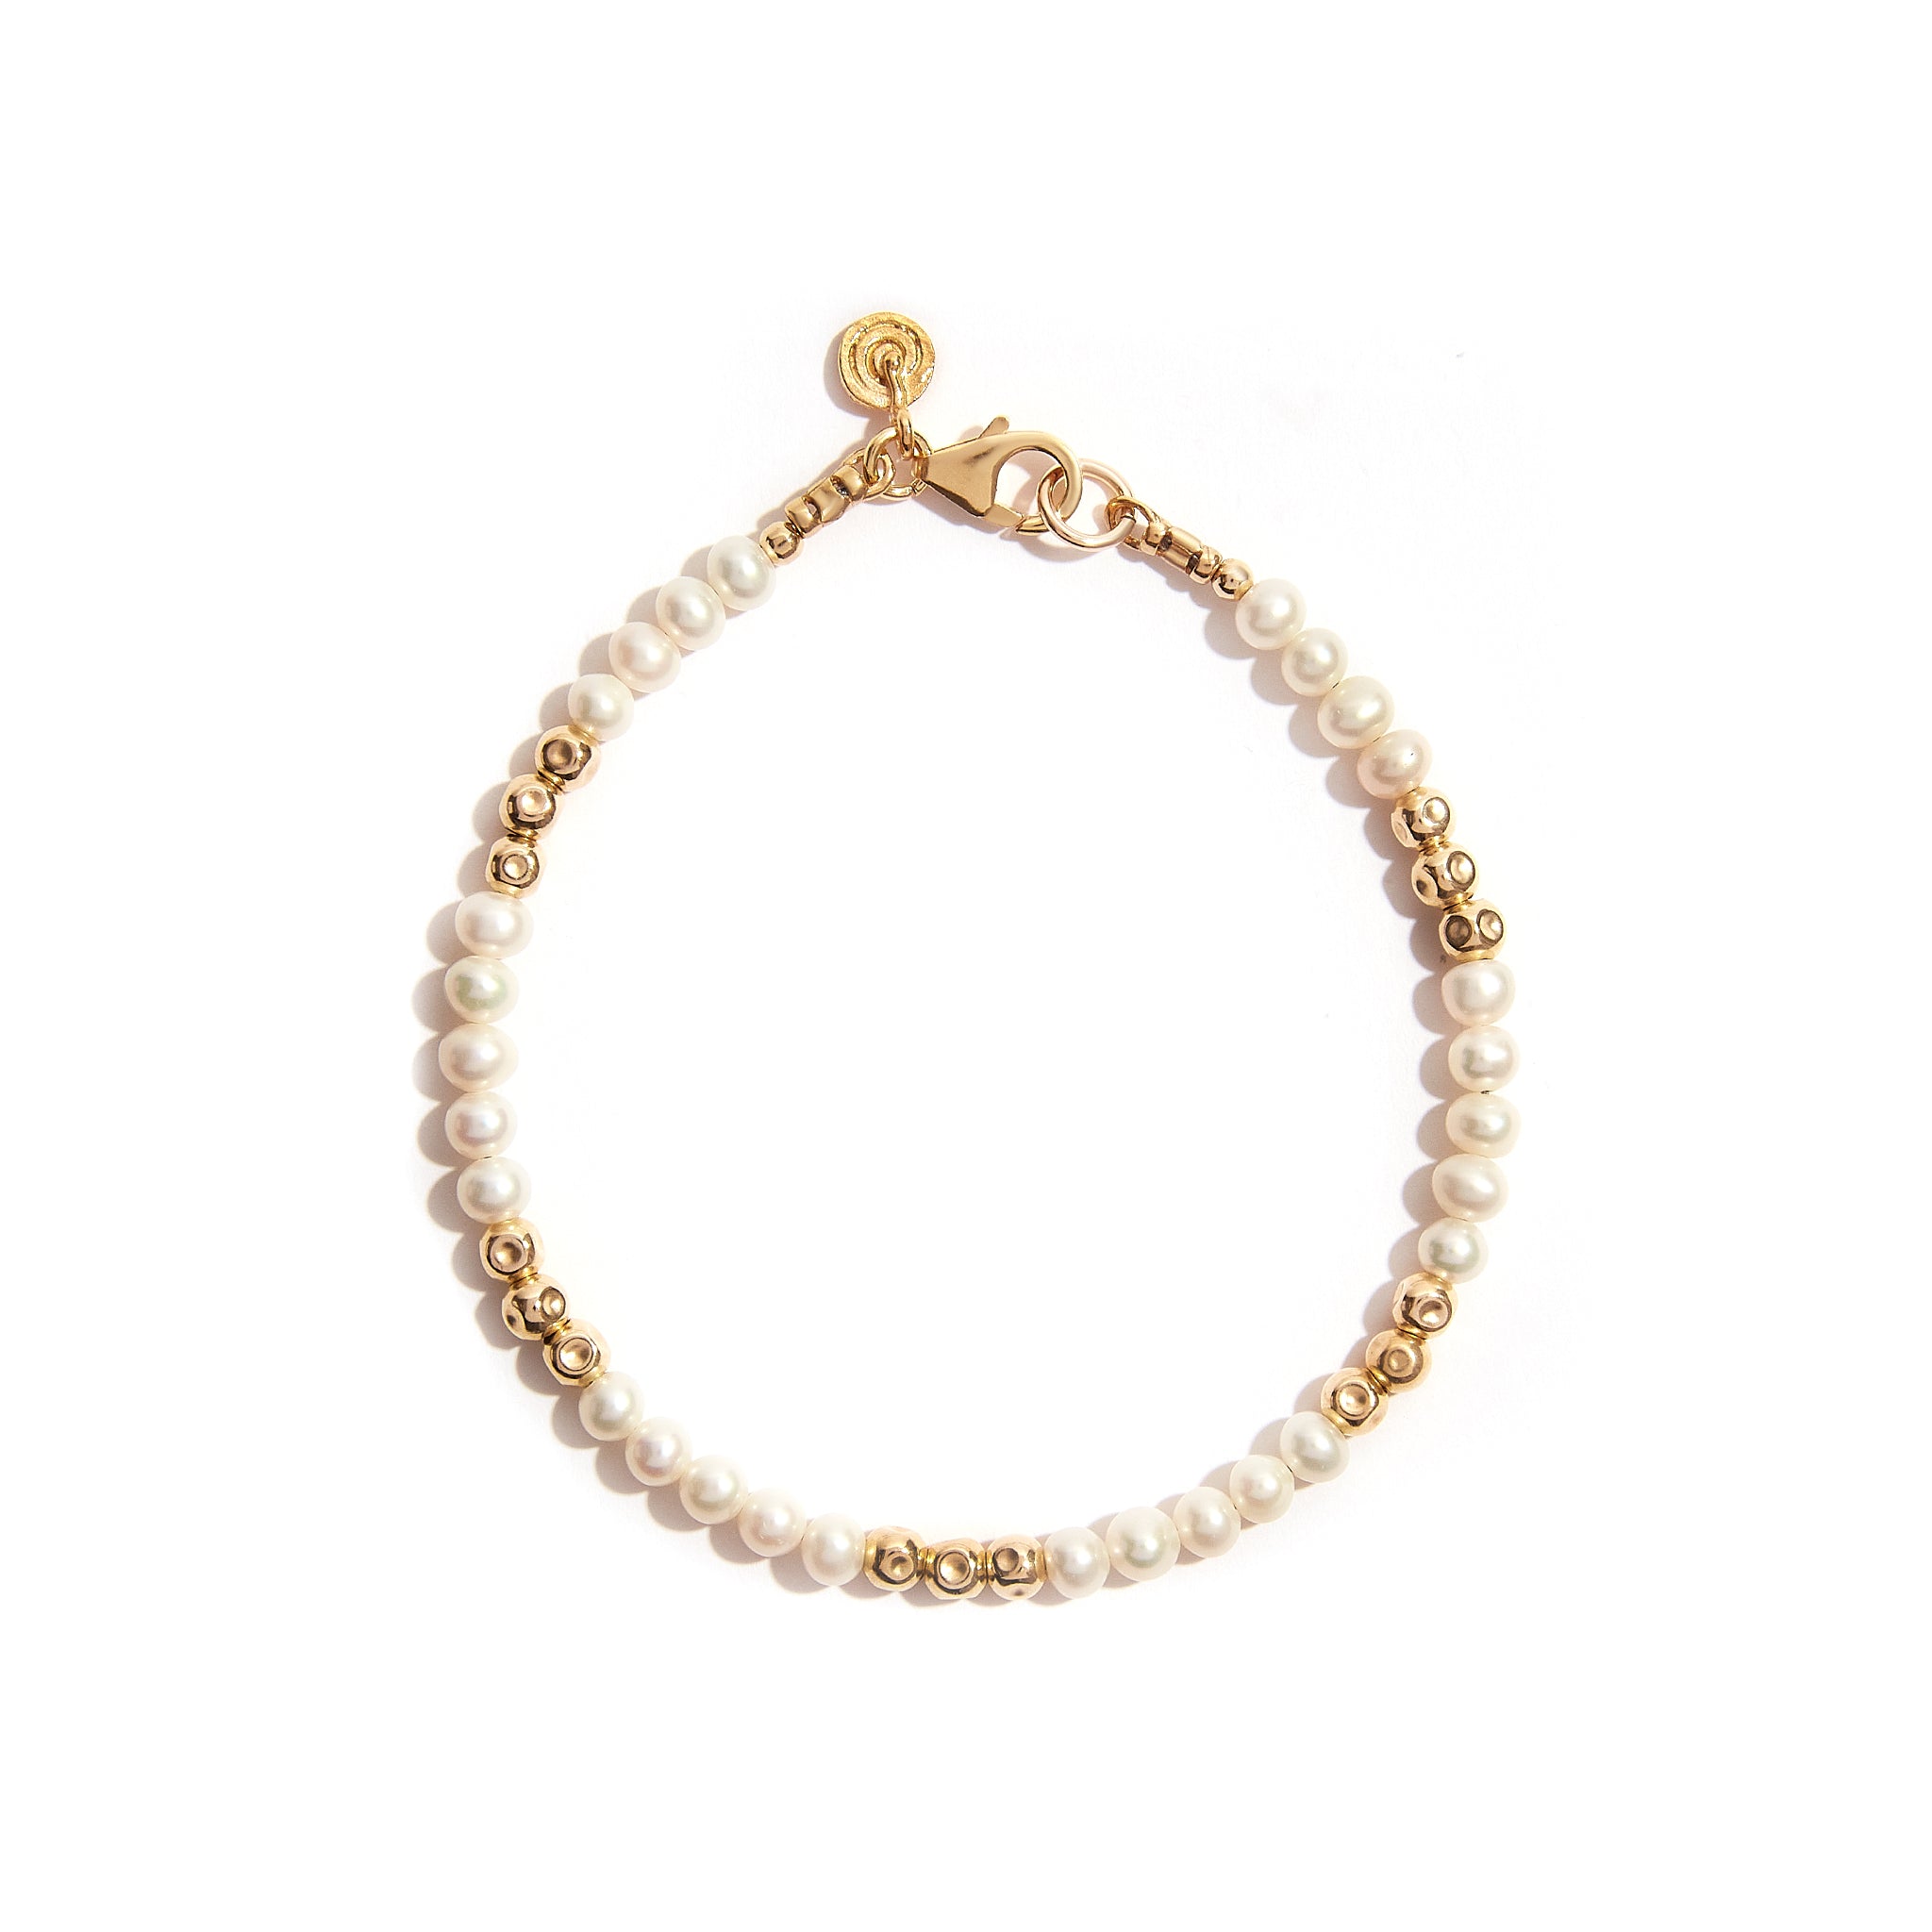 Introducing our Pearl Essence Bracelet, a timeless blend of elegance and sophistication. With a comfortable 7-inch length, it's the perfect accessory for any occasion. Elevate your style effortlessly with this classic piece. Material: 14ct Gold Filled. Length: Measures 7 inches, offering a comfortable fit for most wrists. Gemstone: Pearl